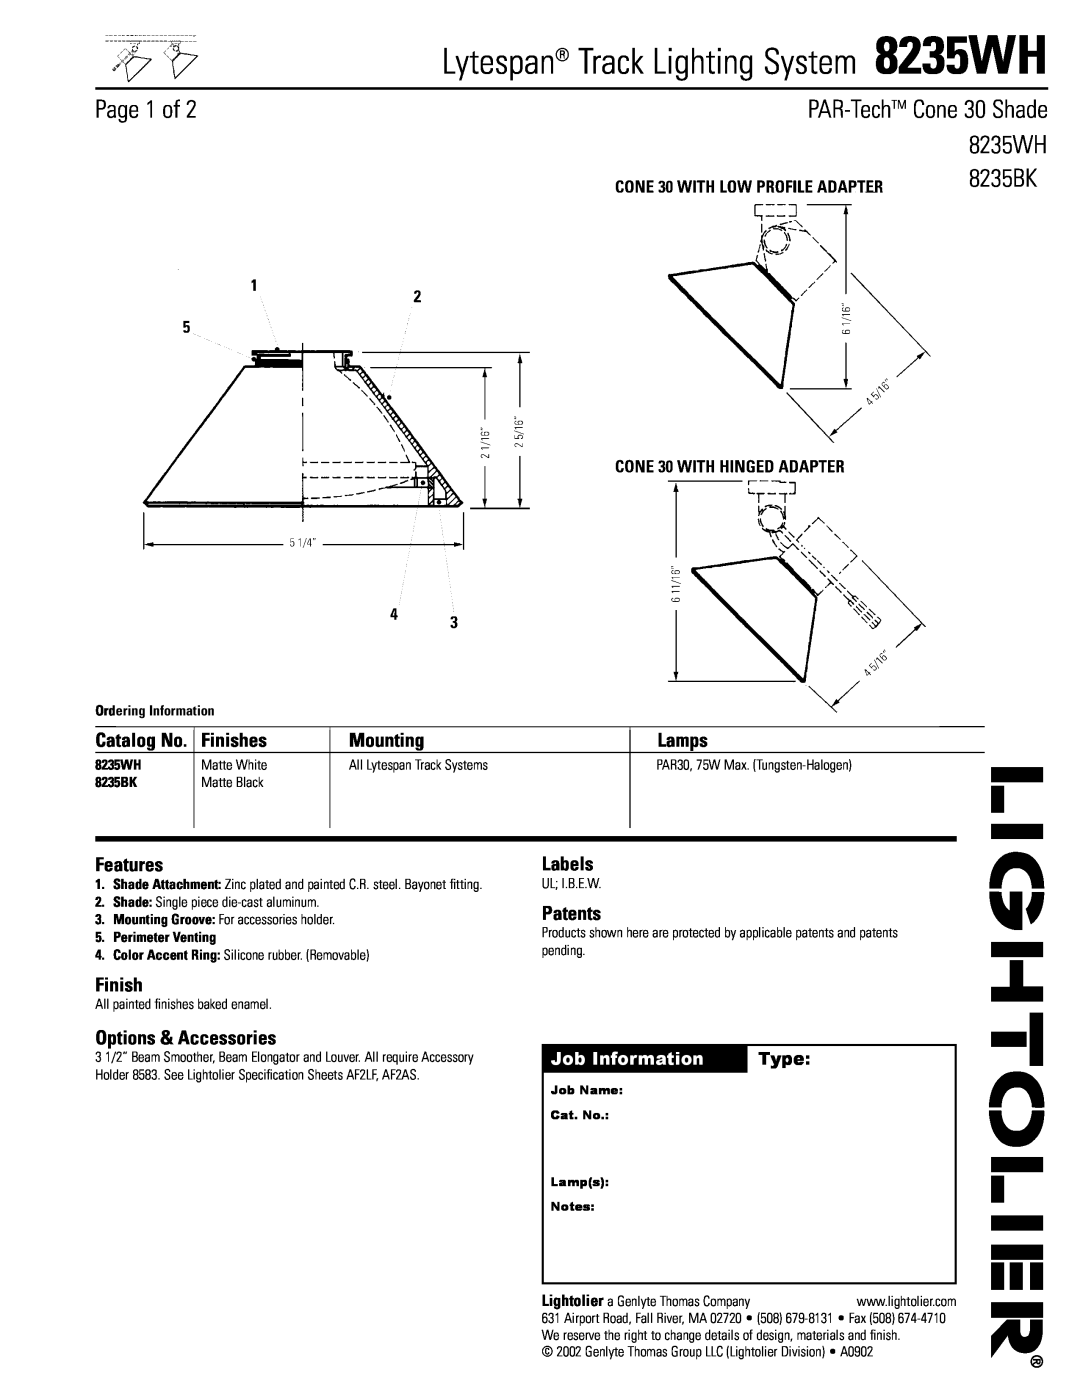 Lightolier 8235WH specifications Page 1 of, PAR-TechTM Cone 30 Shade, Finishes, Mounting, Lamps, Features, Labels, Patents 